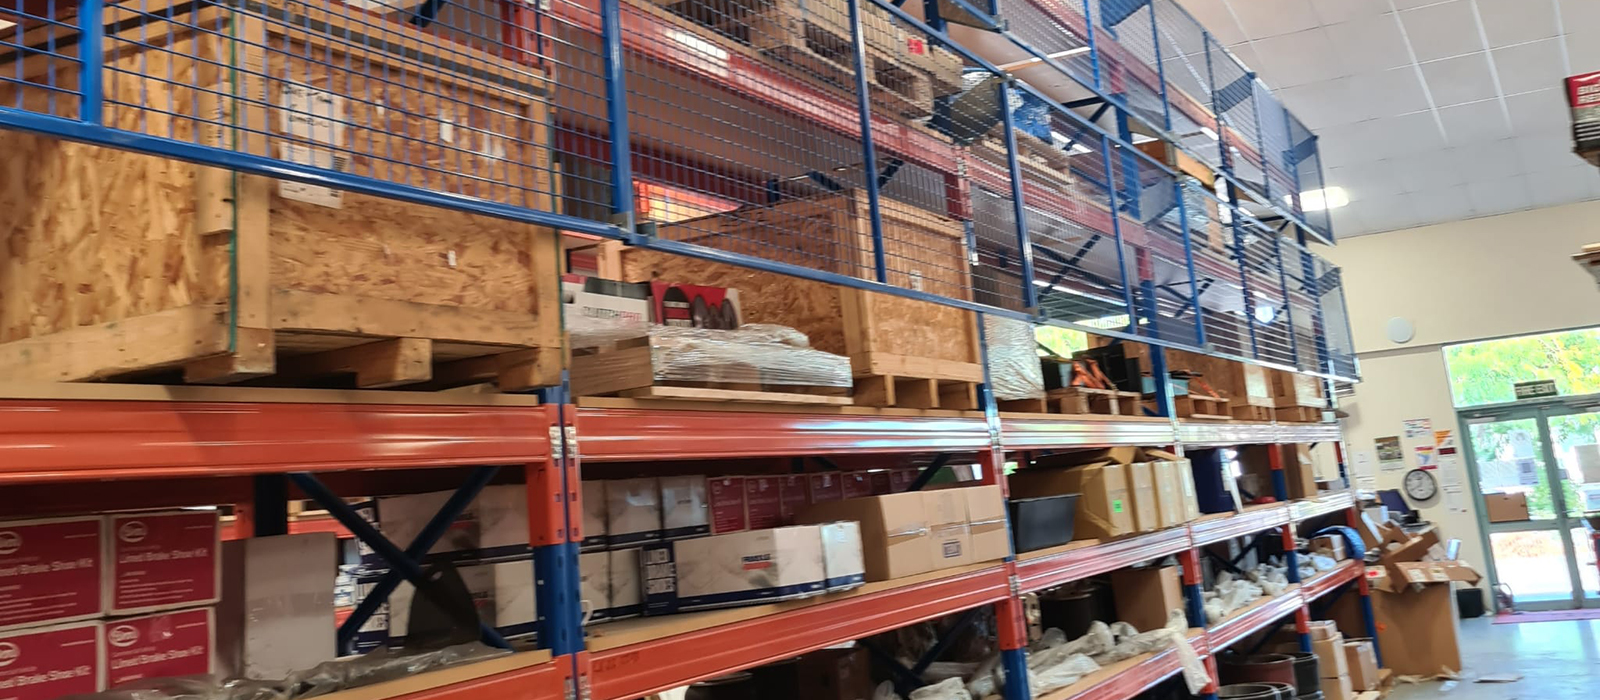 BNT-Palmerston-North-5000-Series-Pallet-Racking-with-Mesh-Backing-Panels_2Gallery